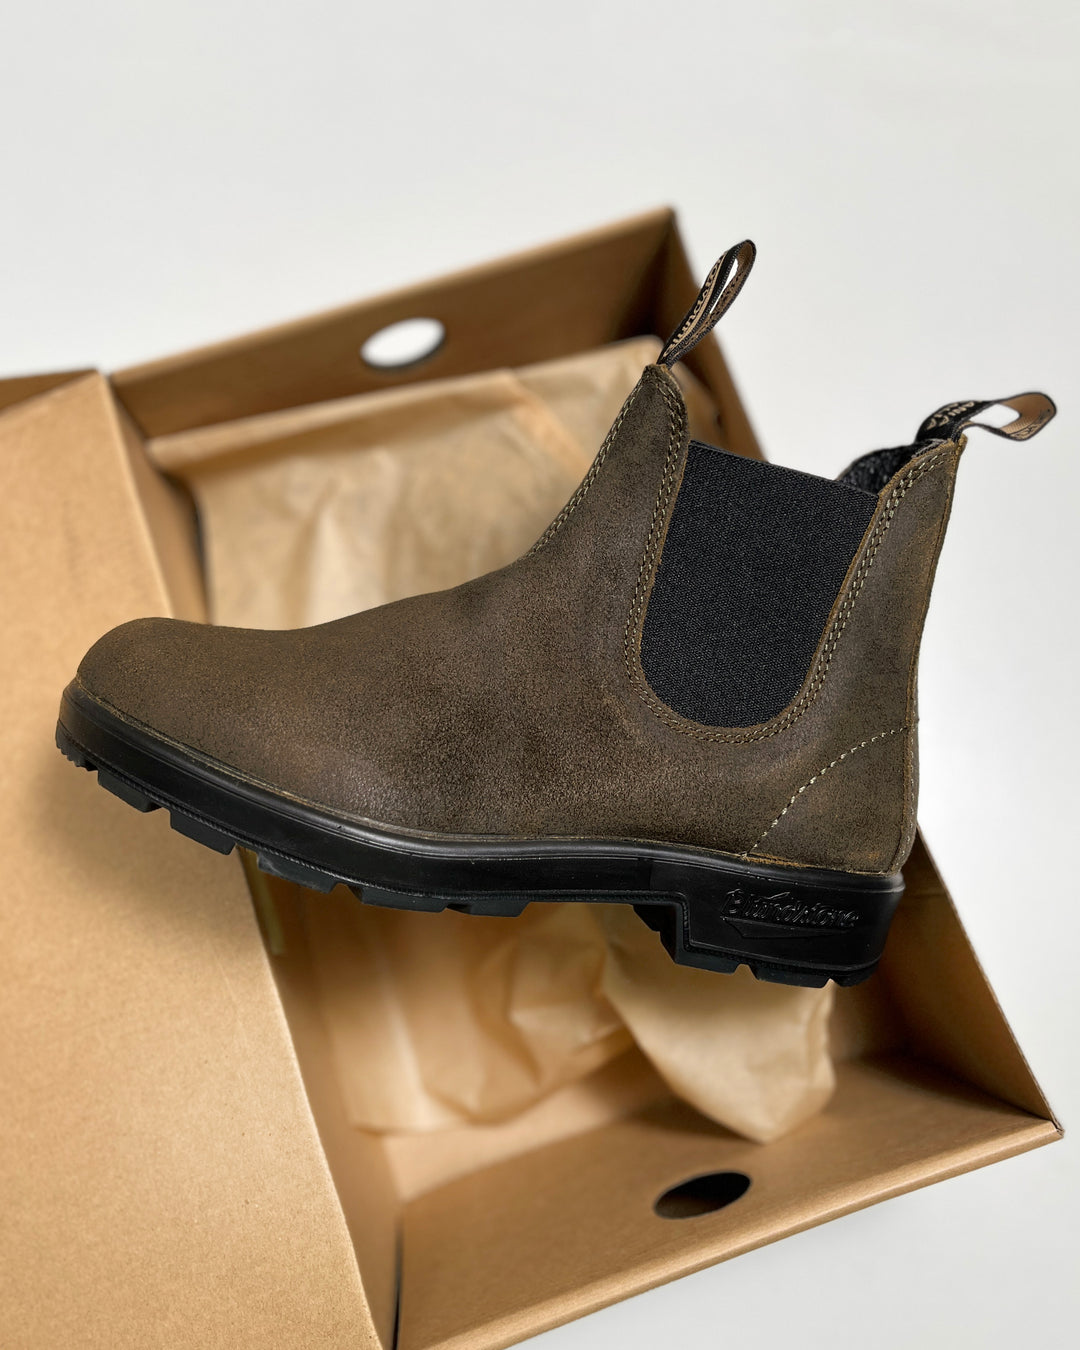 New from Blundstone!